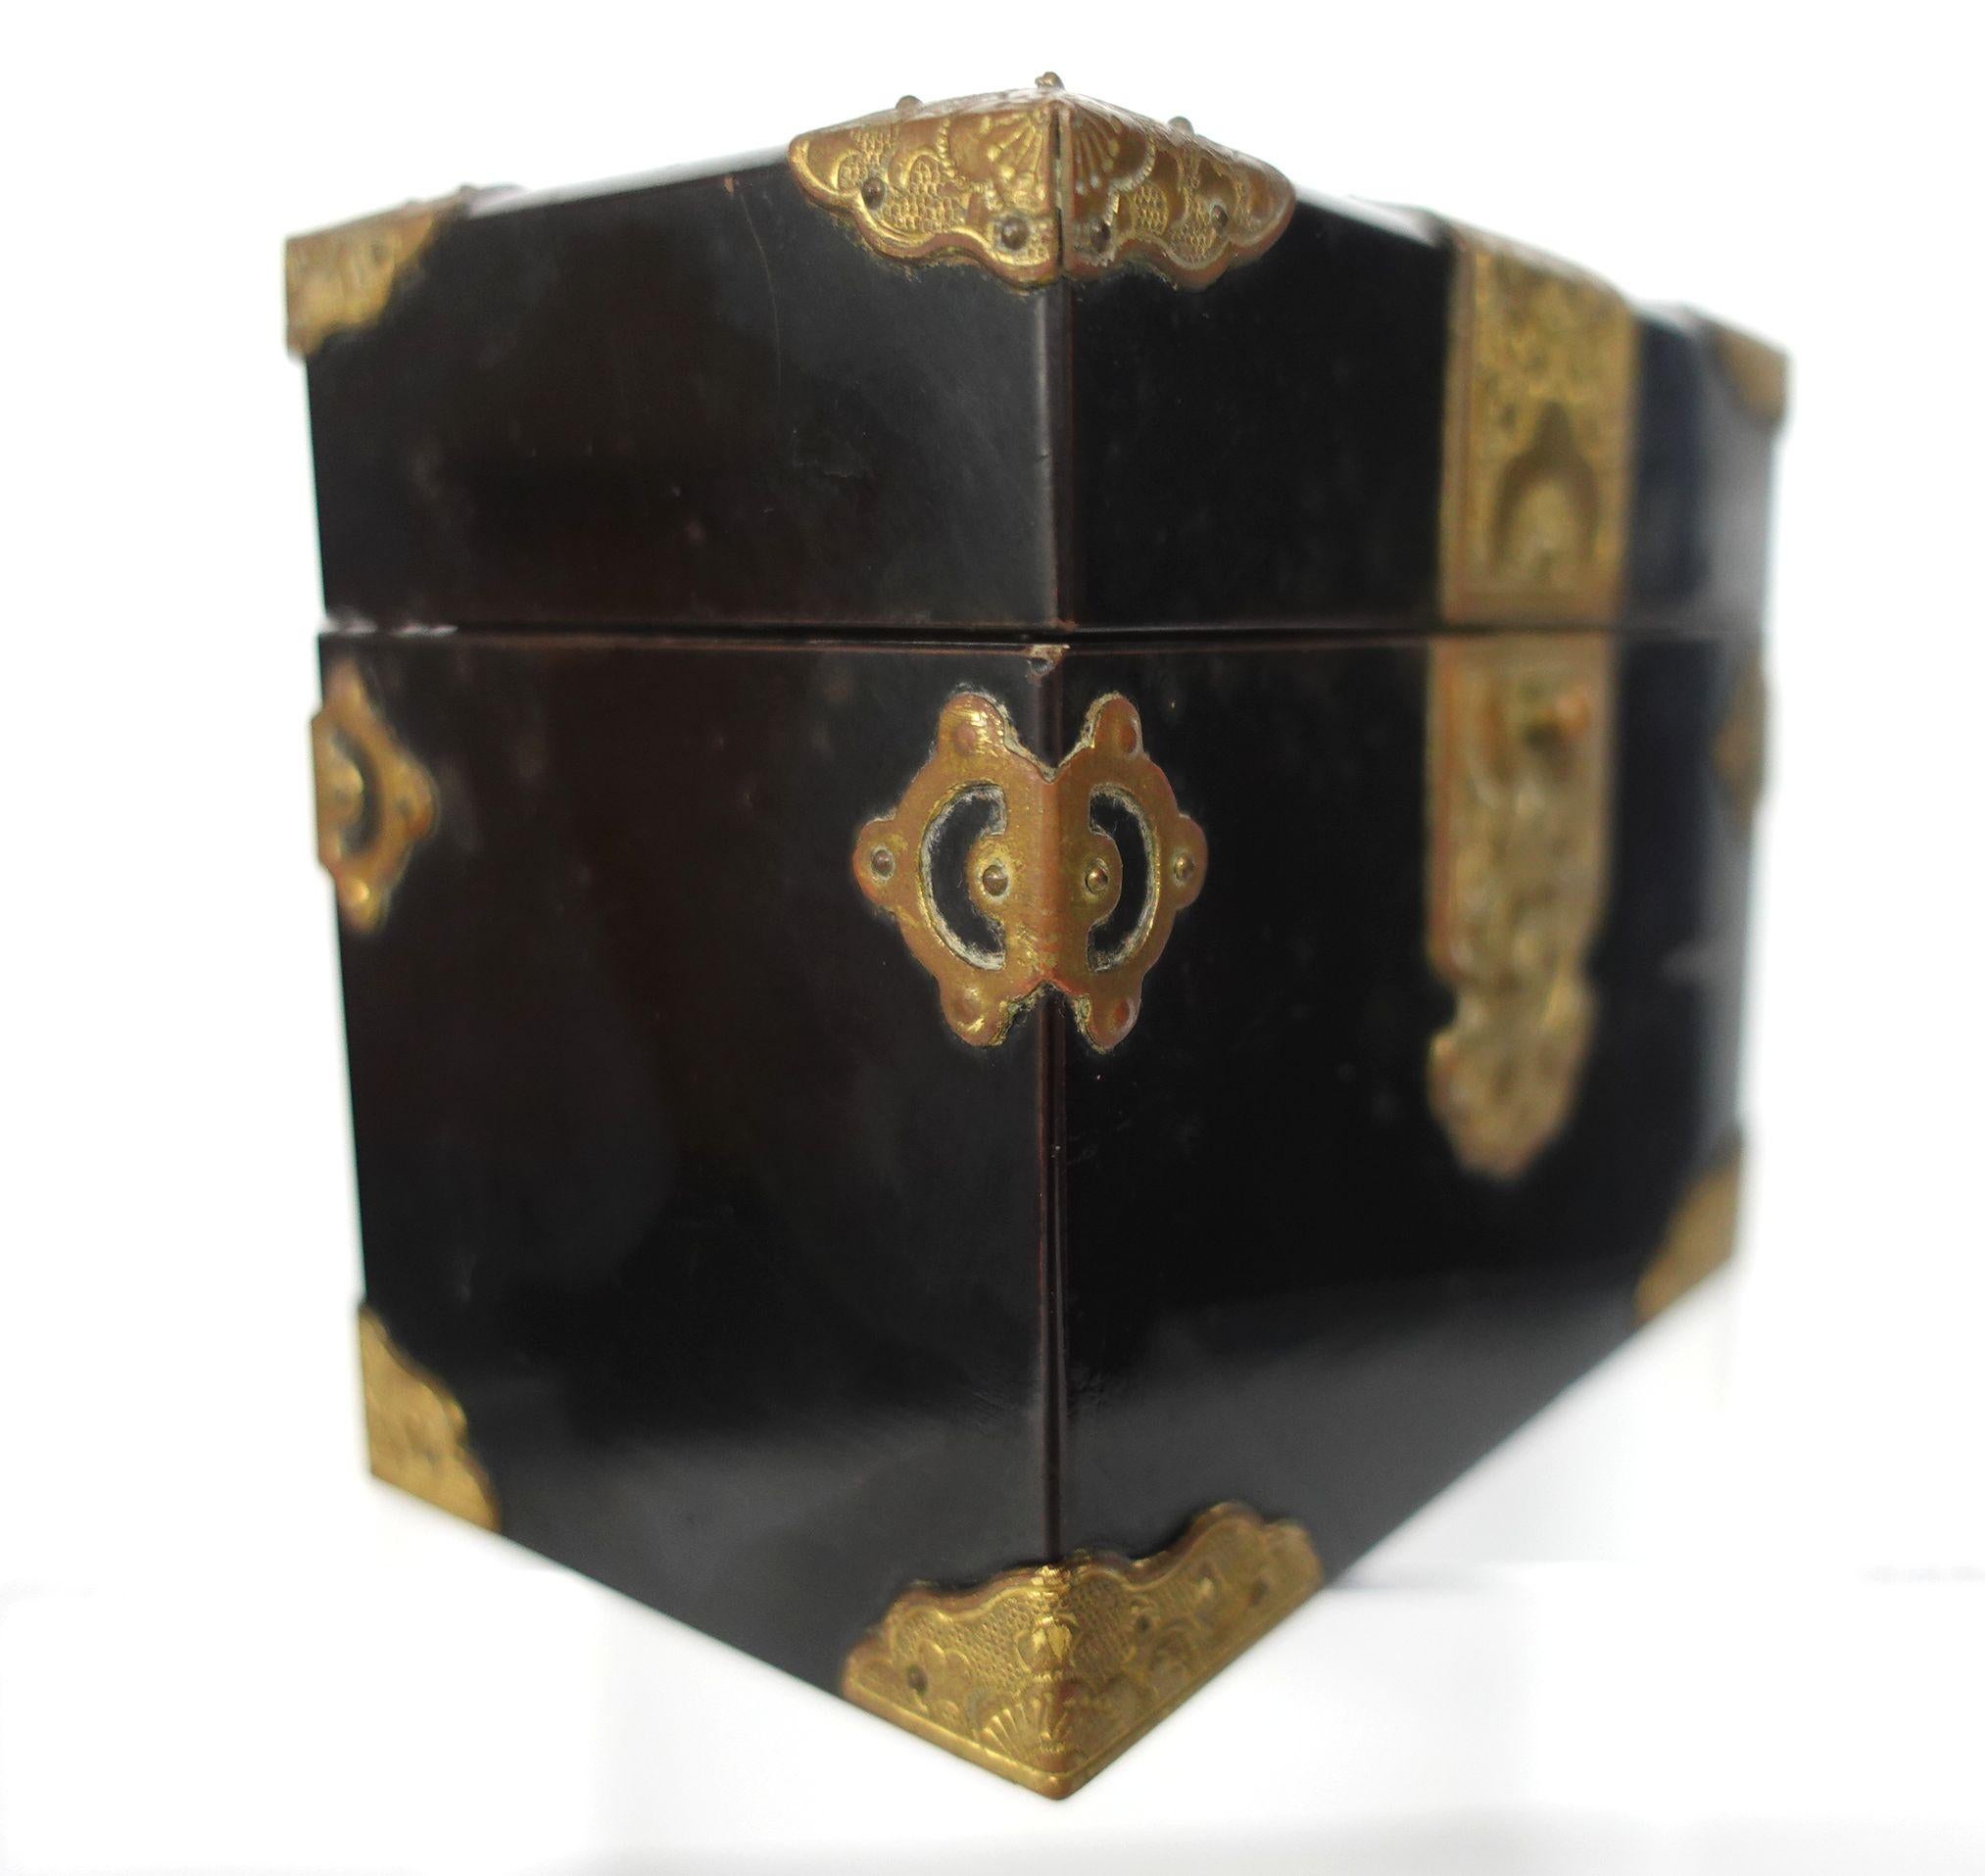 Hand-Crafted Japanese Lacquer Box